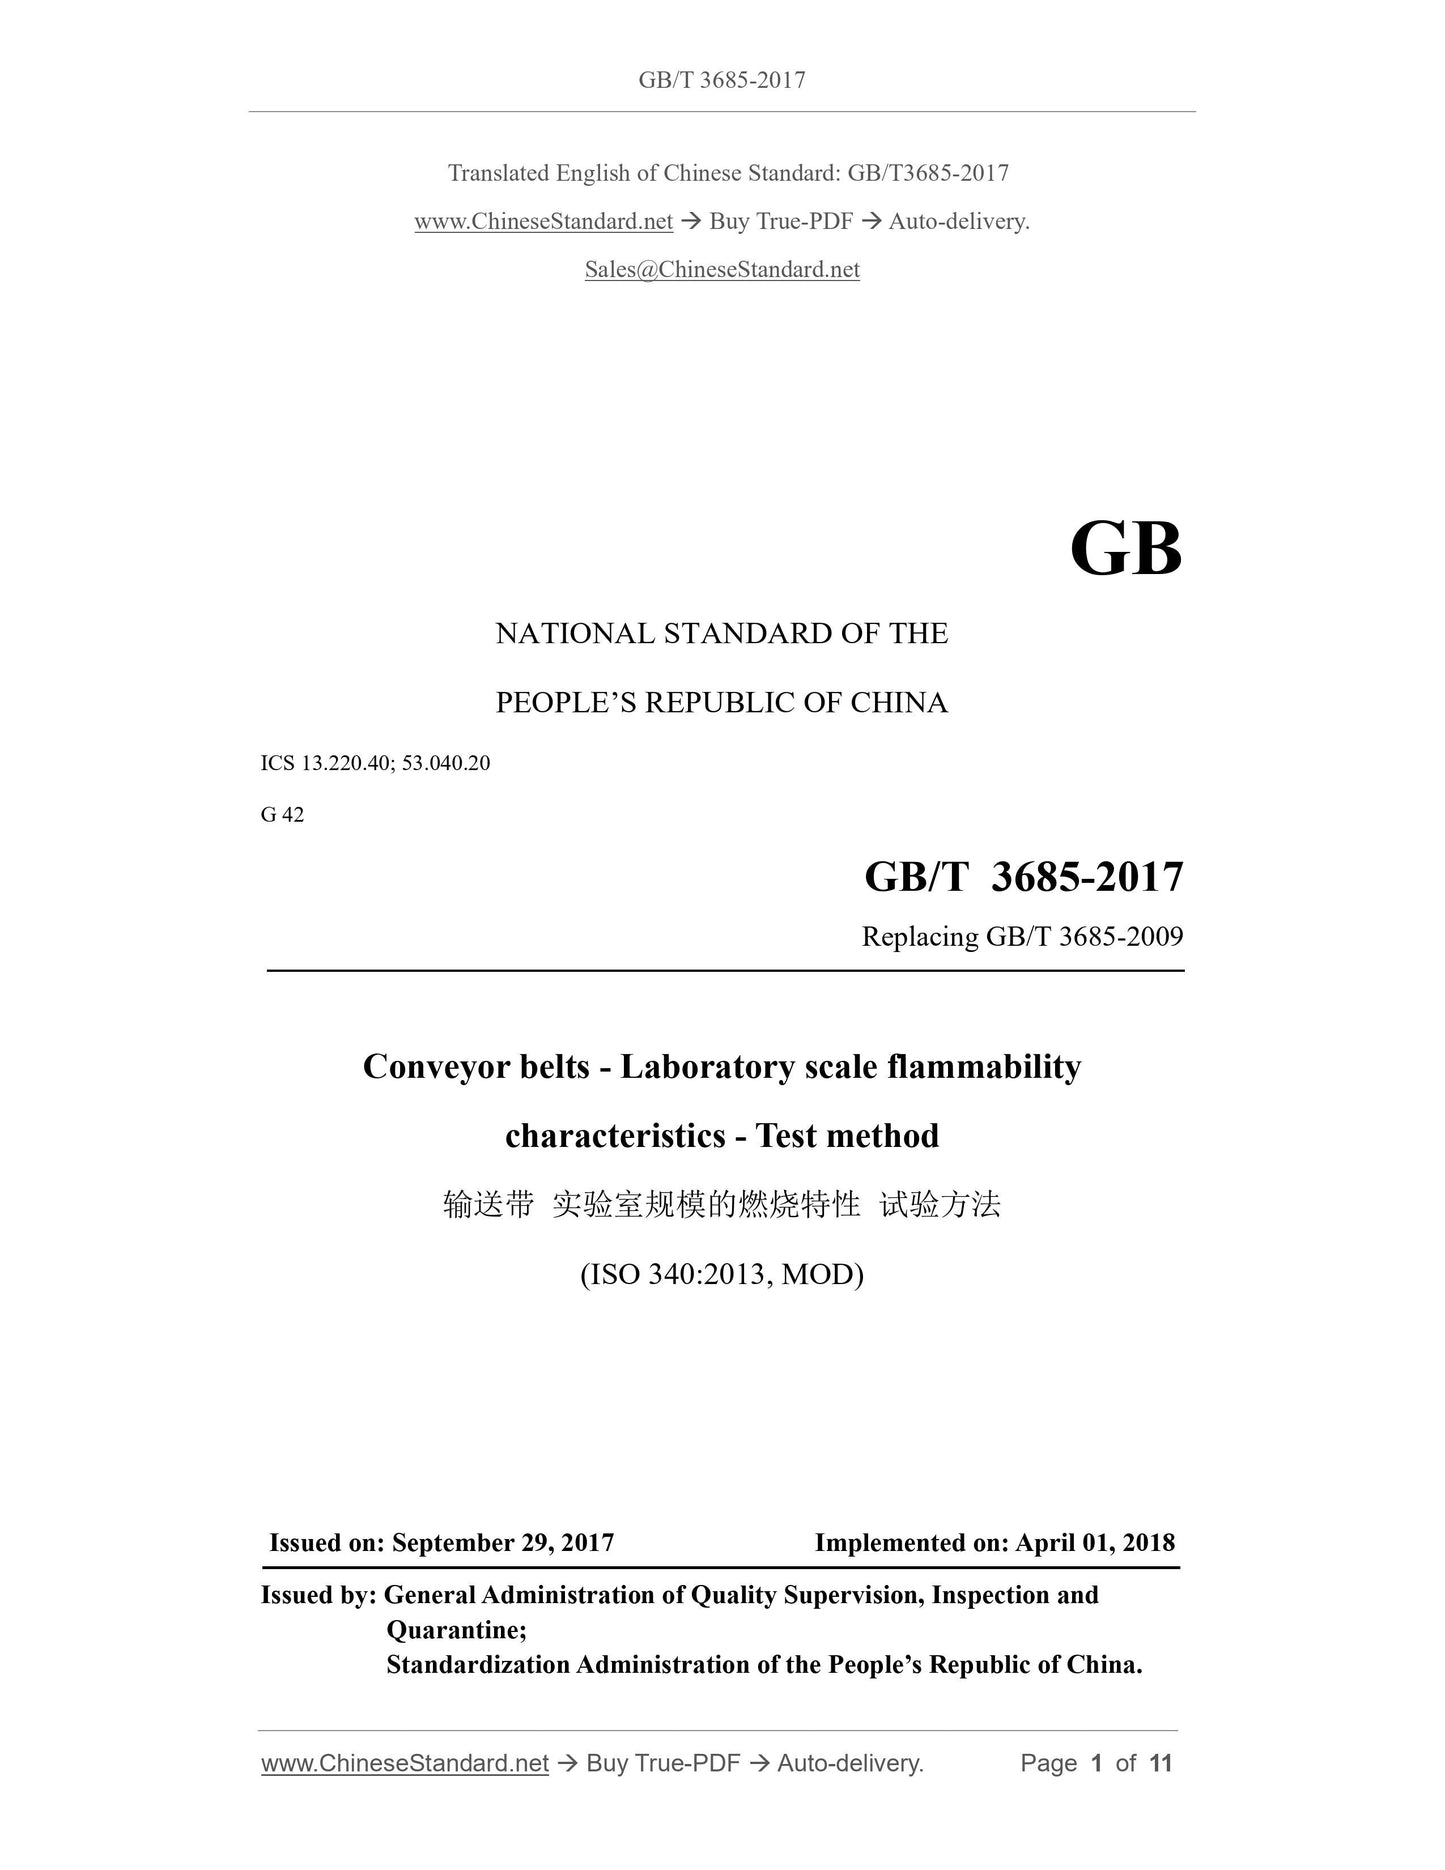 GB/T 3685-2017 Page 1